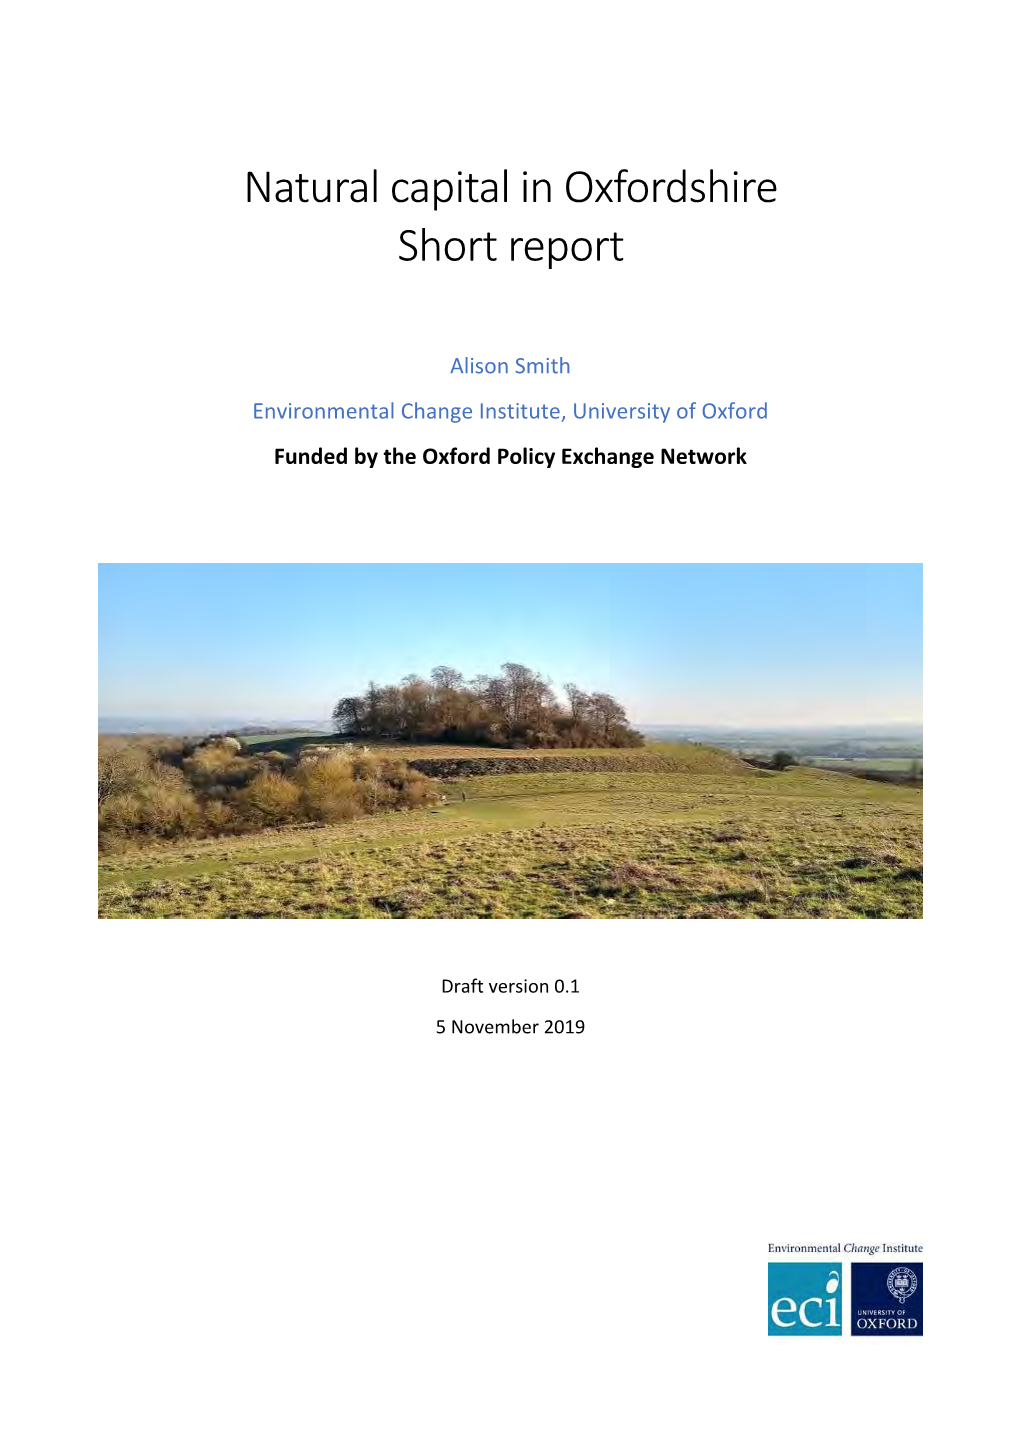 Natural Capital in Oxfordshire Short Report